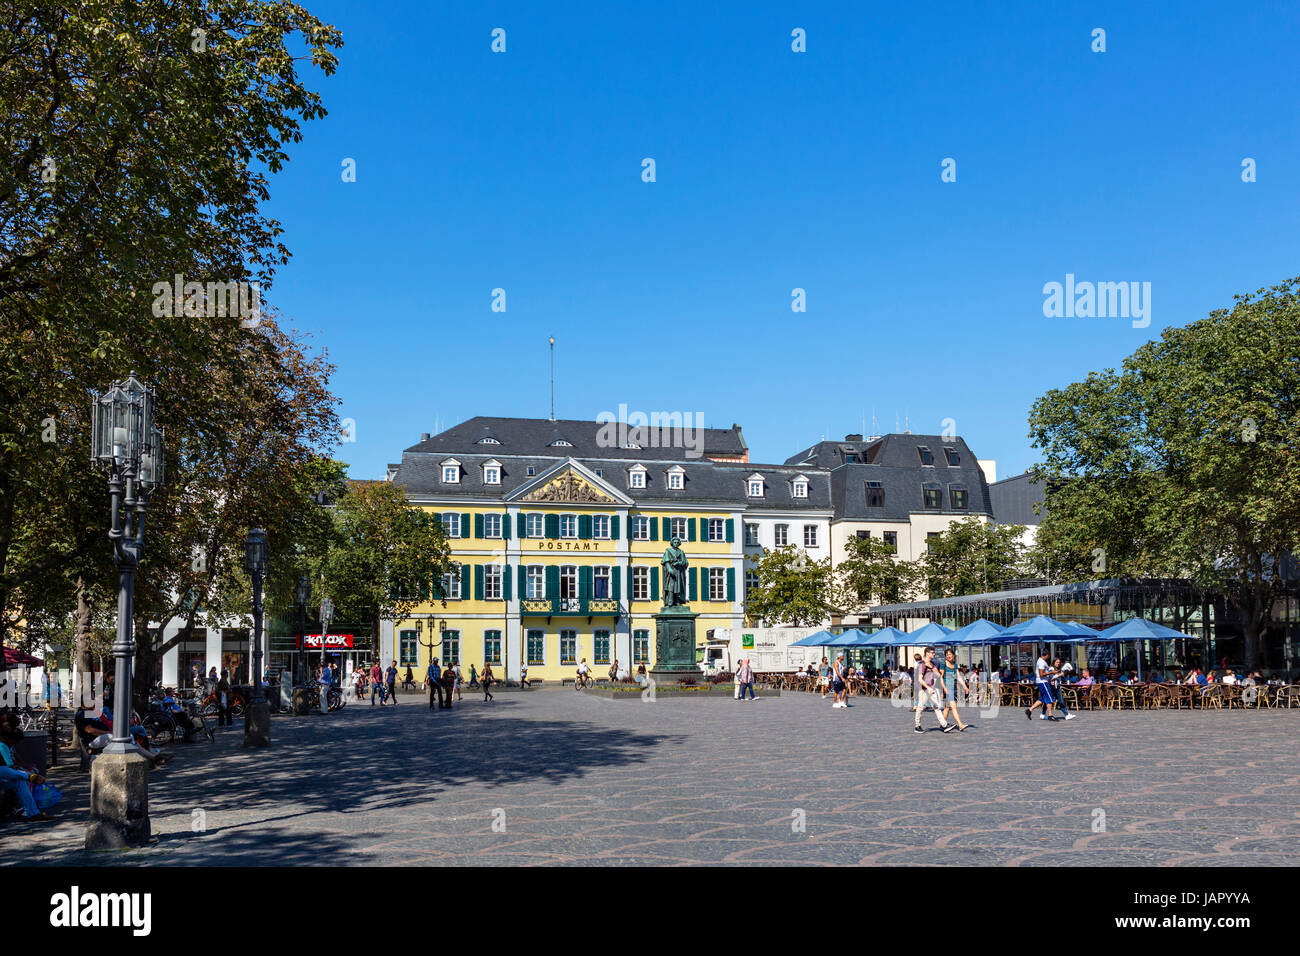 Cafe in front of the Post Office in Munsterplatz, Bonn, Germany Stock Photo